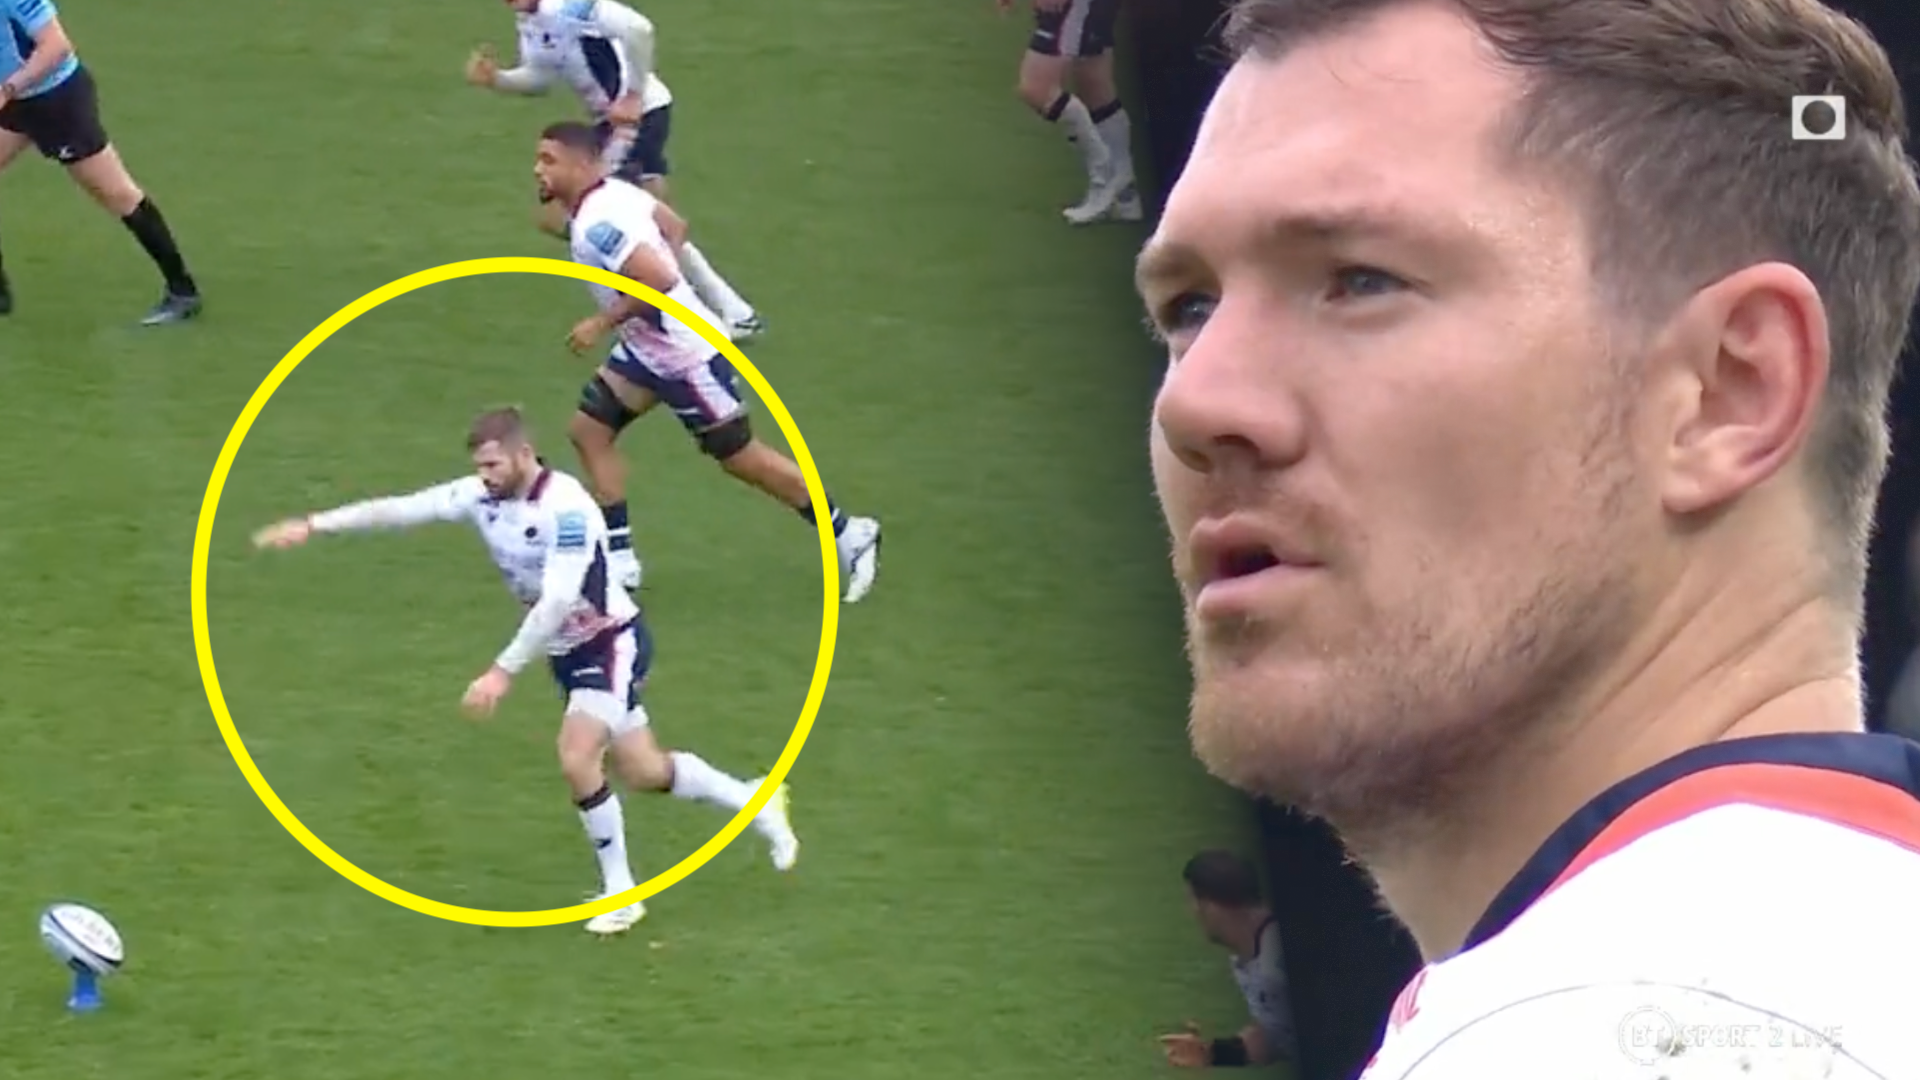 Eddie Jones left humiliated as England rejects steal show in epic kick battle